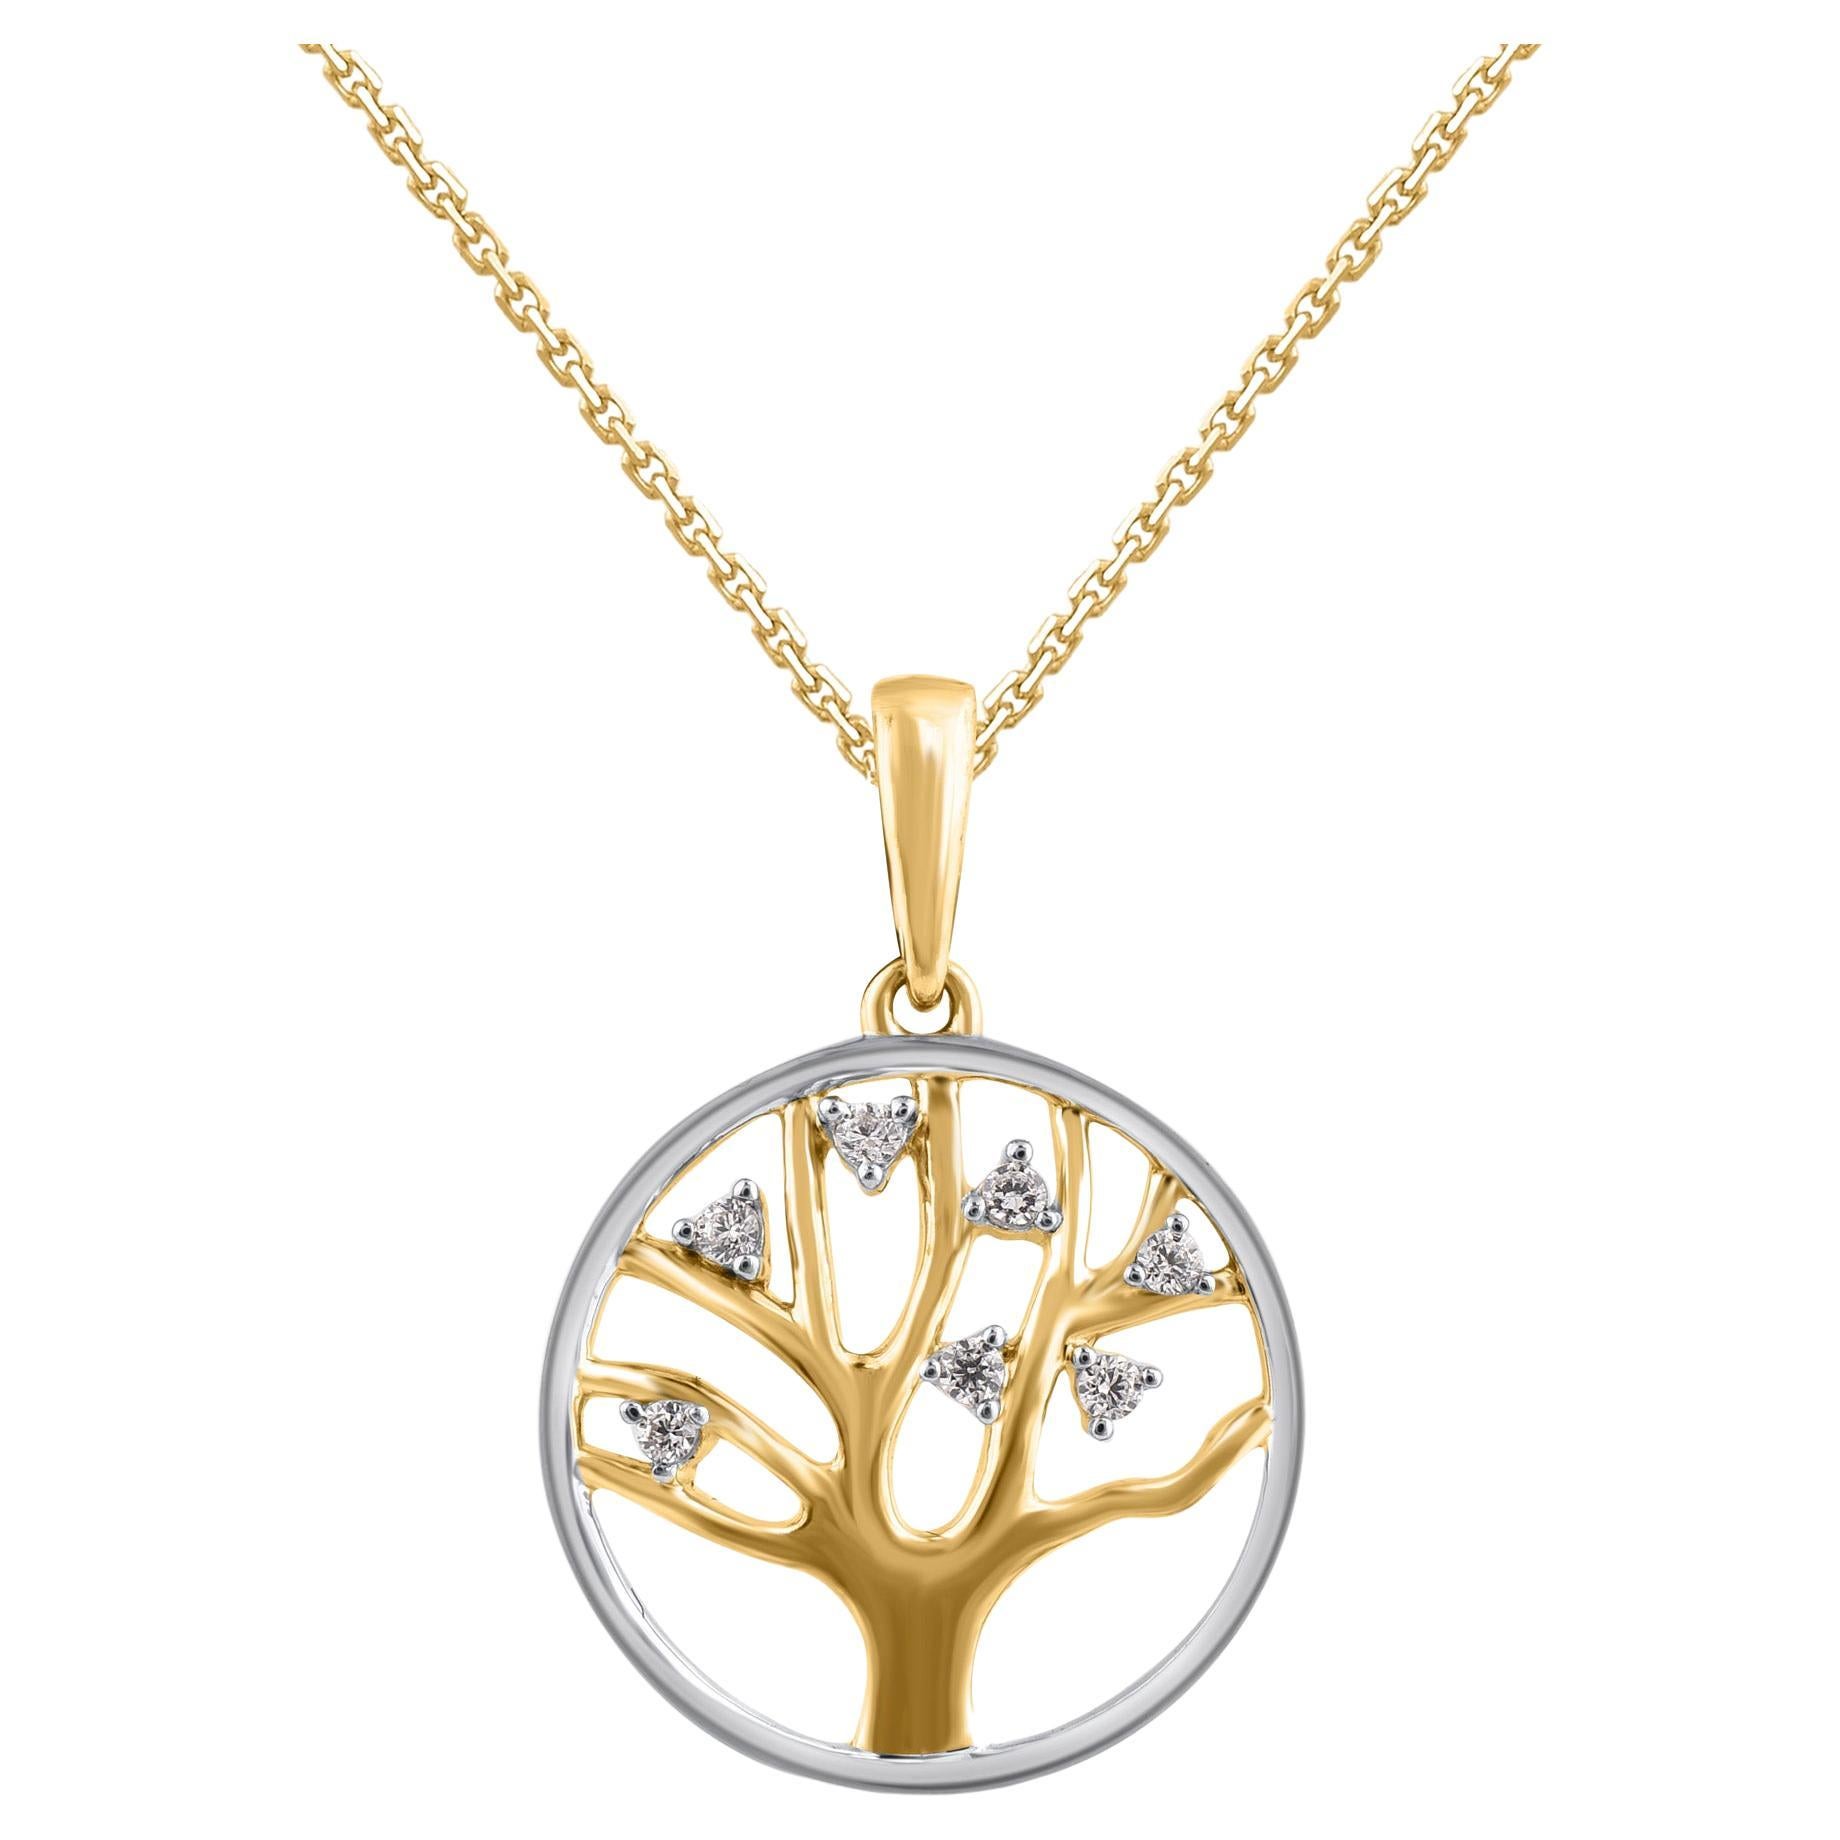 TJD 0.05 Carat Brilliant Cut Diamond 14KT Two Tone Gold Tree of Life Necklace For Sale